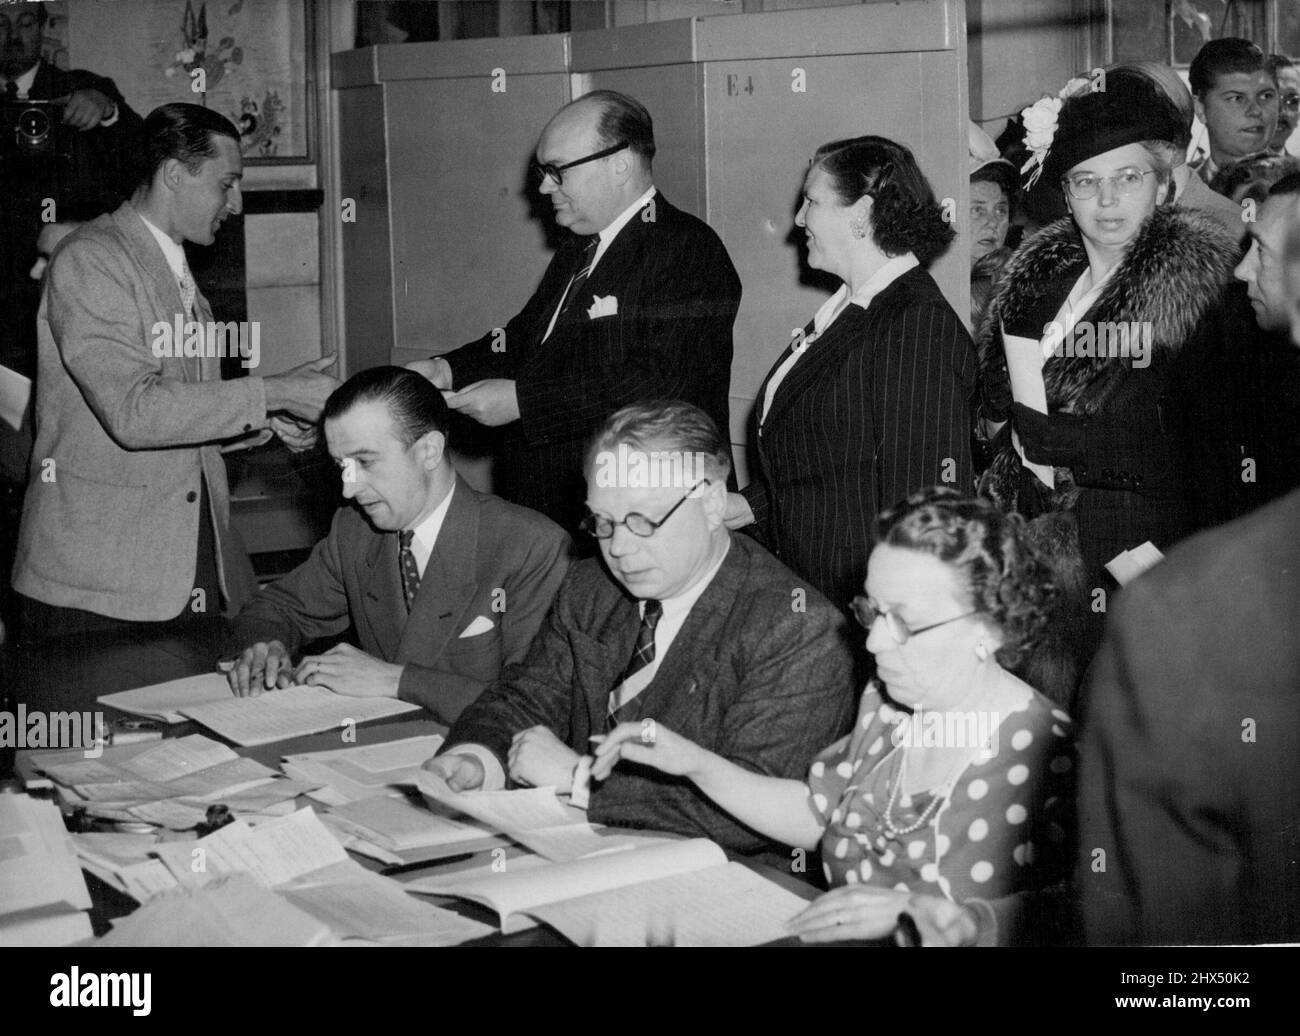 Spaak Votes in Belgian Elections -- Mr. Paul Heri Spaak, Belgian Premier and foreign Minister, collects his ballot paper to cast his vote in Brussels, for the Parliament elections today June 26. With him are some Belgian women, who voted for the first time in the election. July 15, 1949. Stock Photo